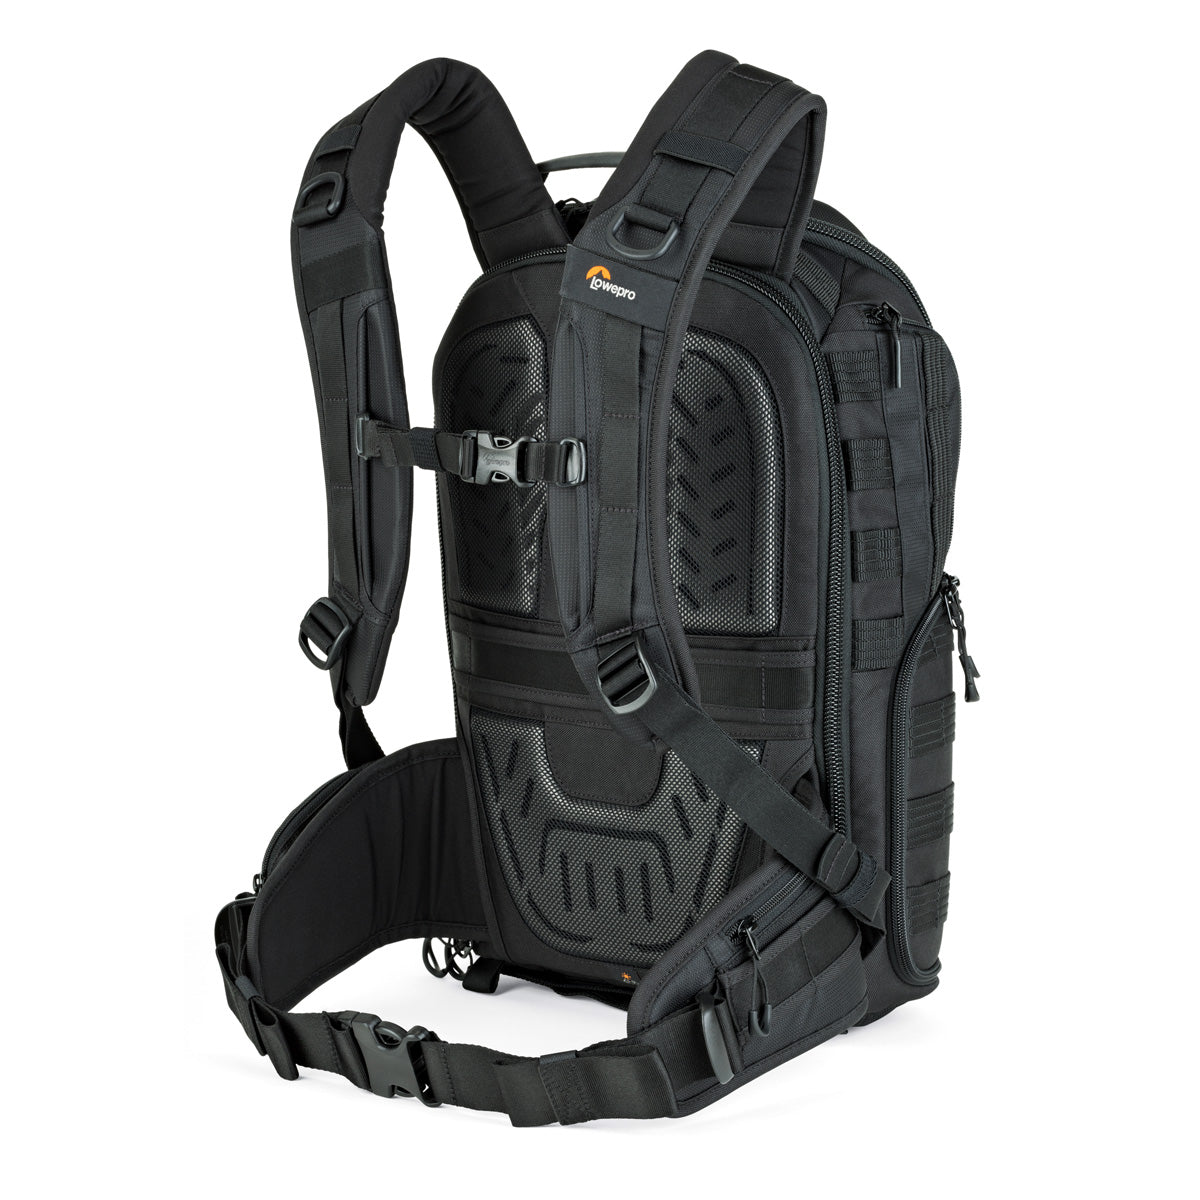 Lowepro ProTactic BP 350 AW II Camera and Laptop Backpack (Black)